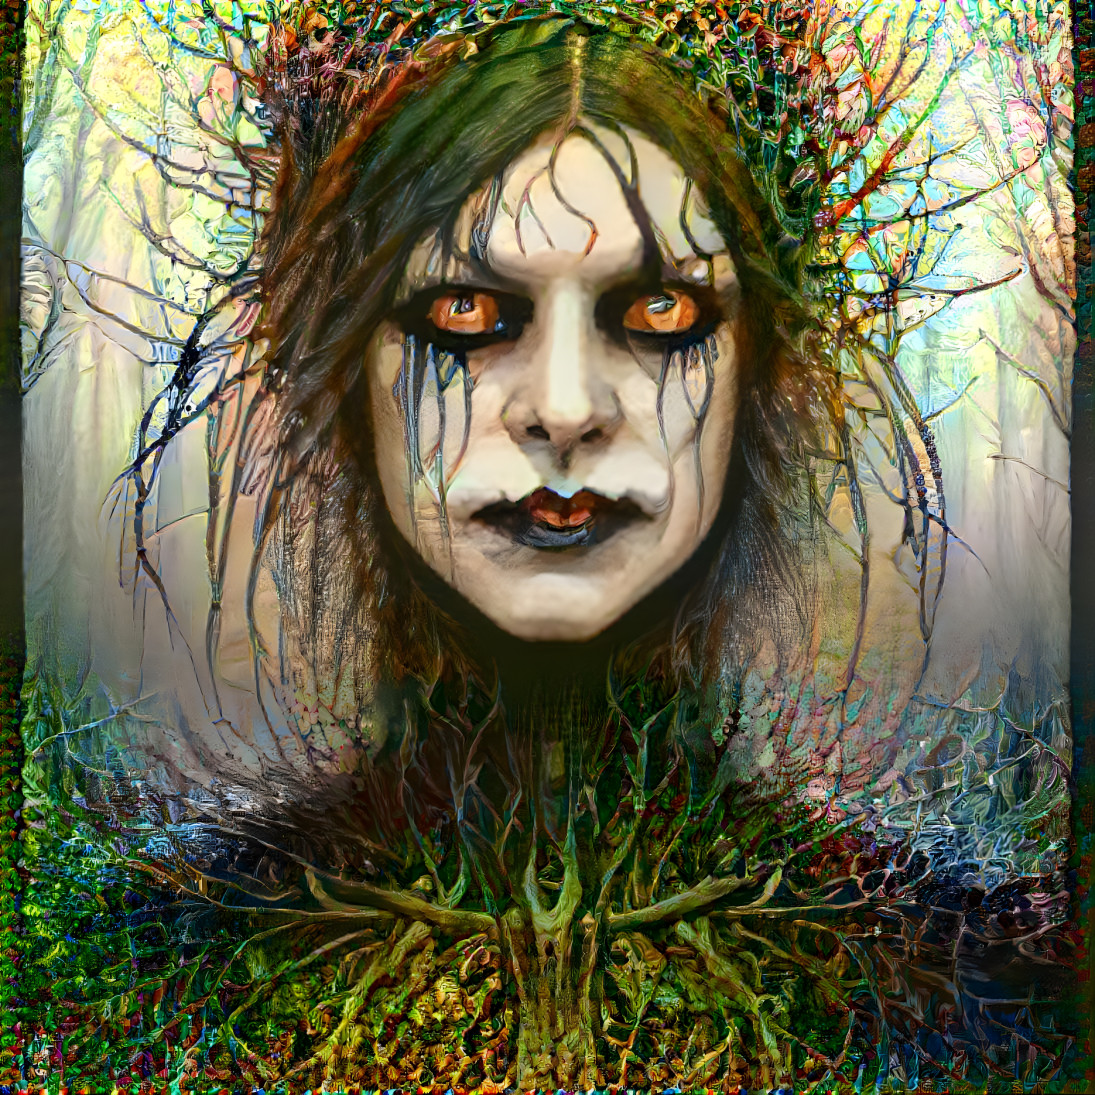 Forest witch